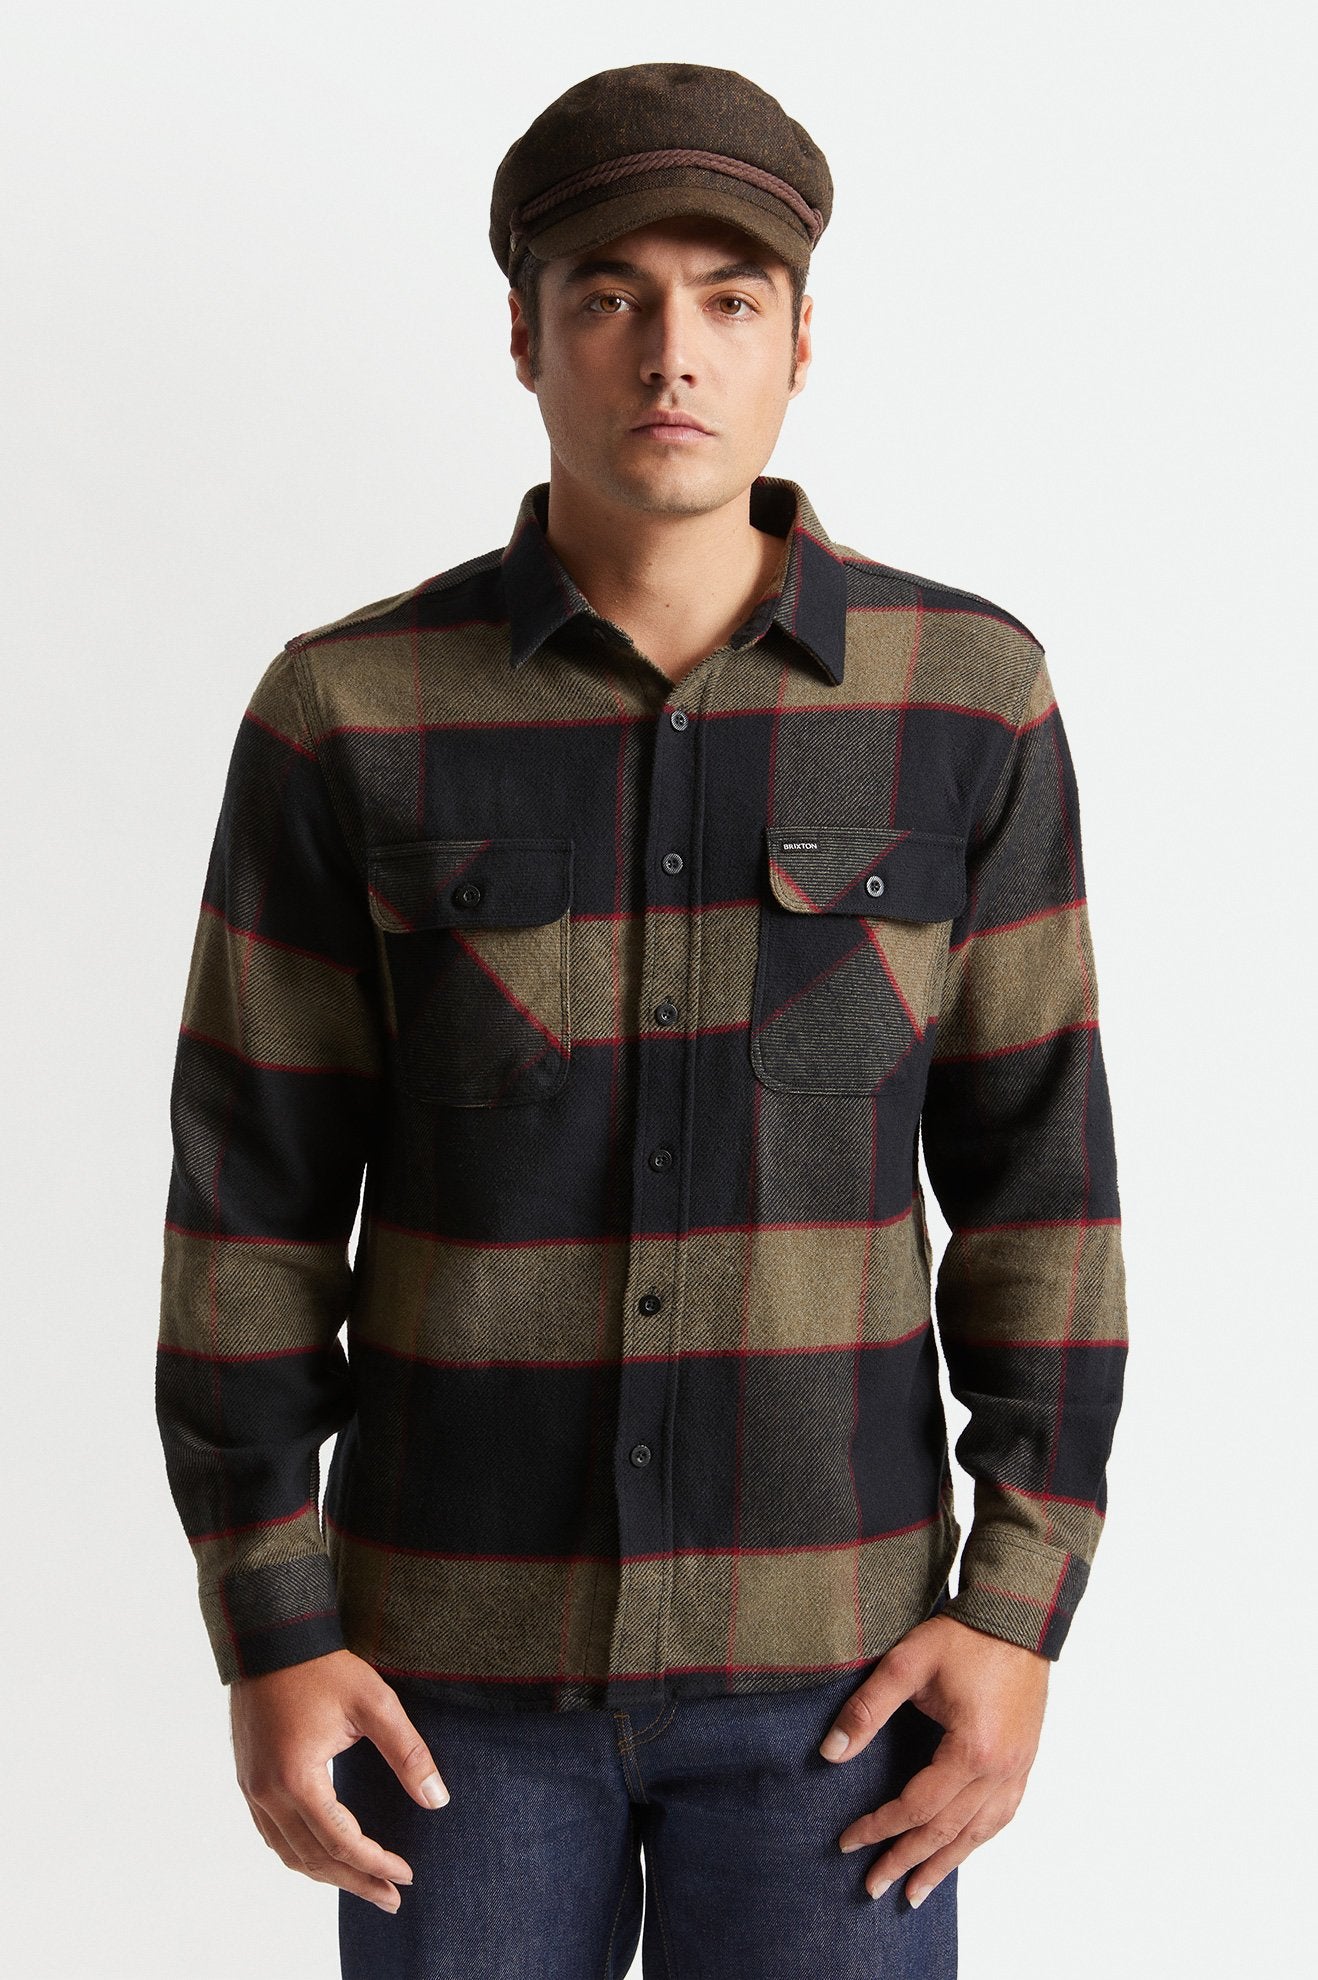 Bowery Flannel - heather grey/charcoal